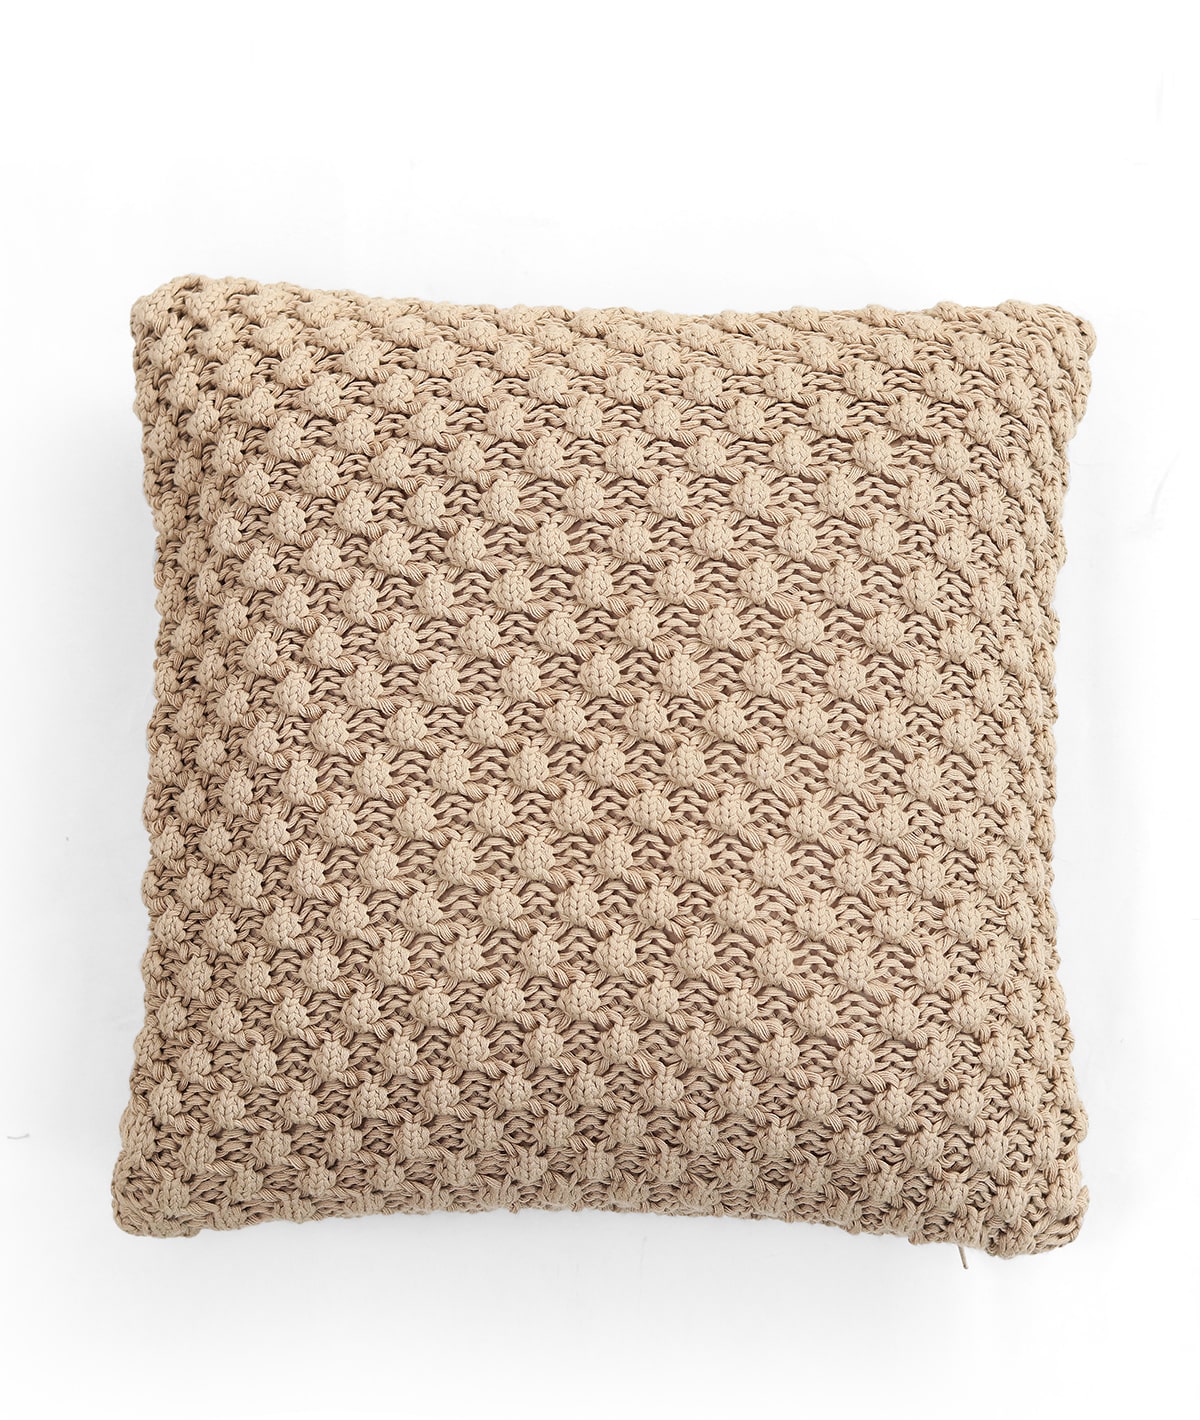 Popcorn Knit Linen Cotton Knitted Decorative 16 X 16 Inches Cushion Cover